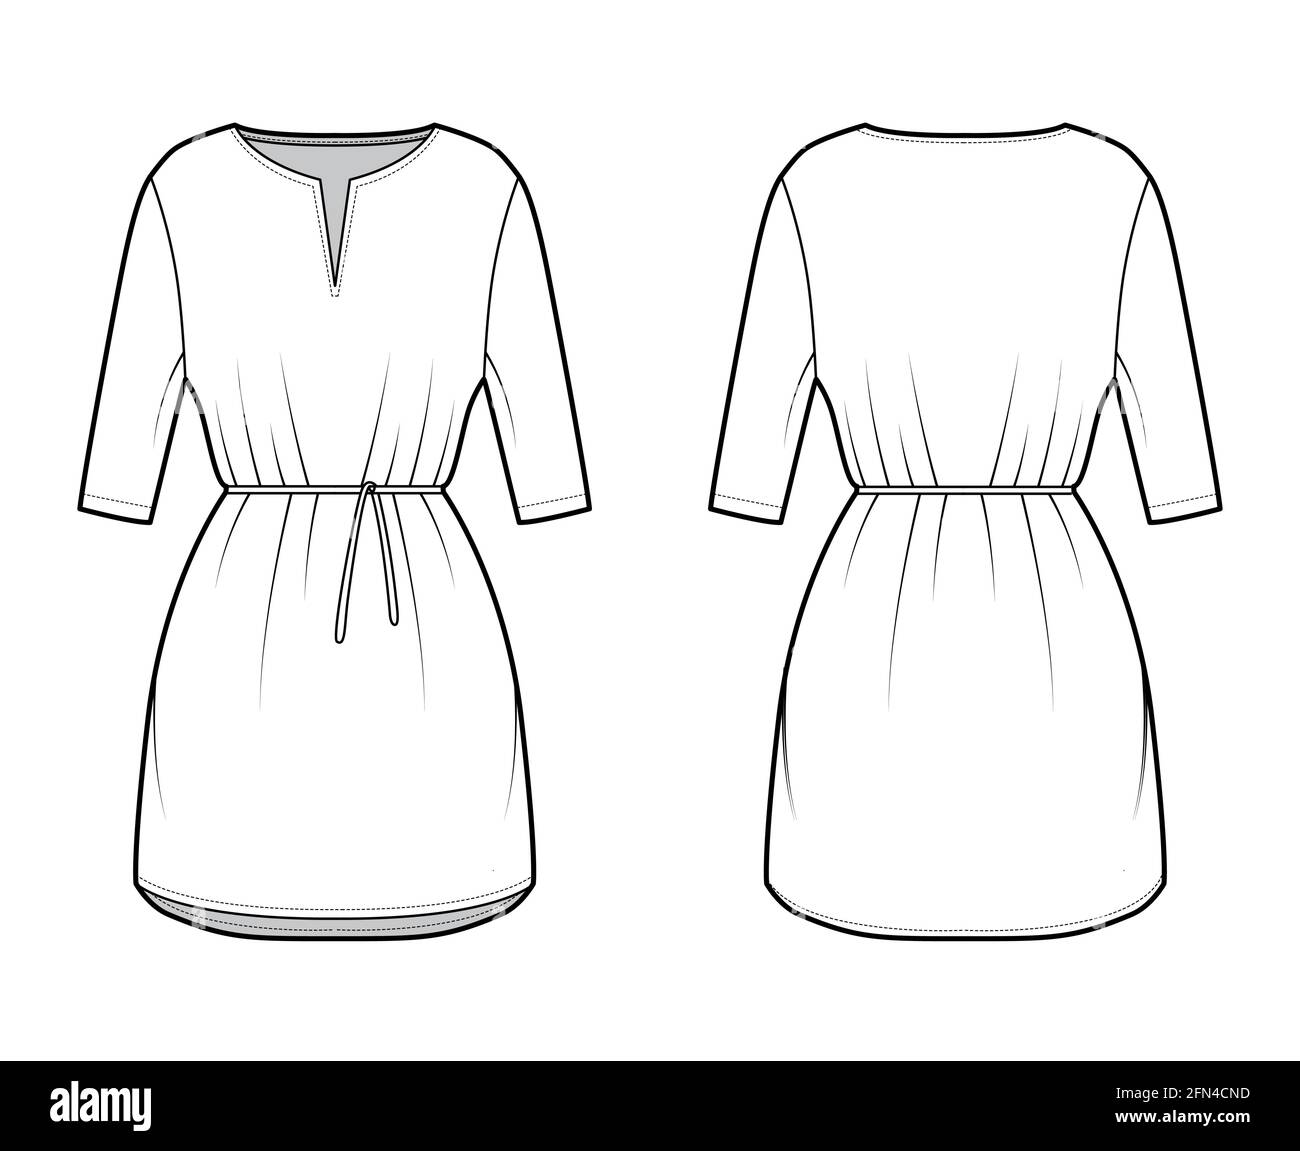 Dress tunic technical fashion illustration with tie, elbow sleeves, oversized body, mini length skirt, slashed neck. Flat apparel front, back, white color style. Women, men CAD mockup Stock Vector